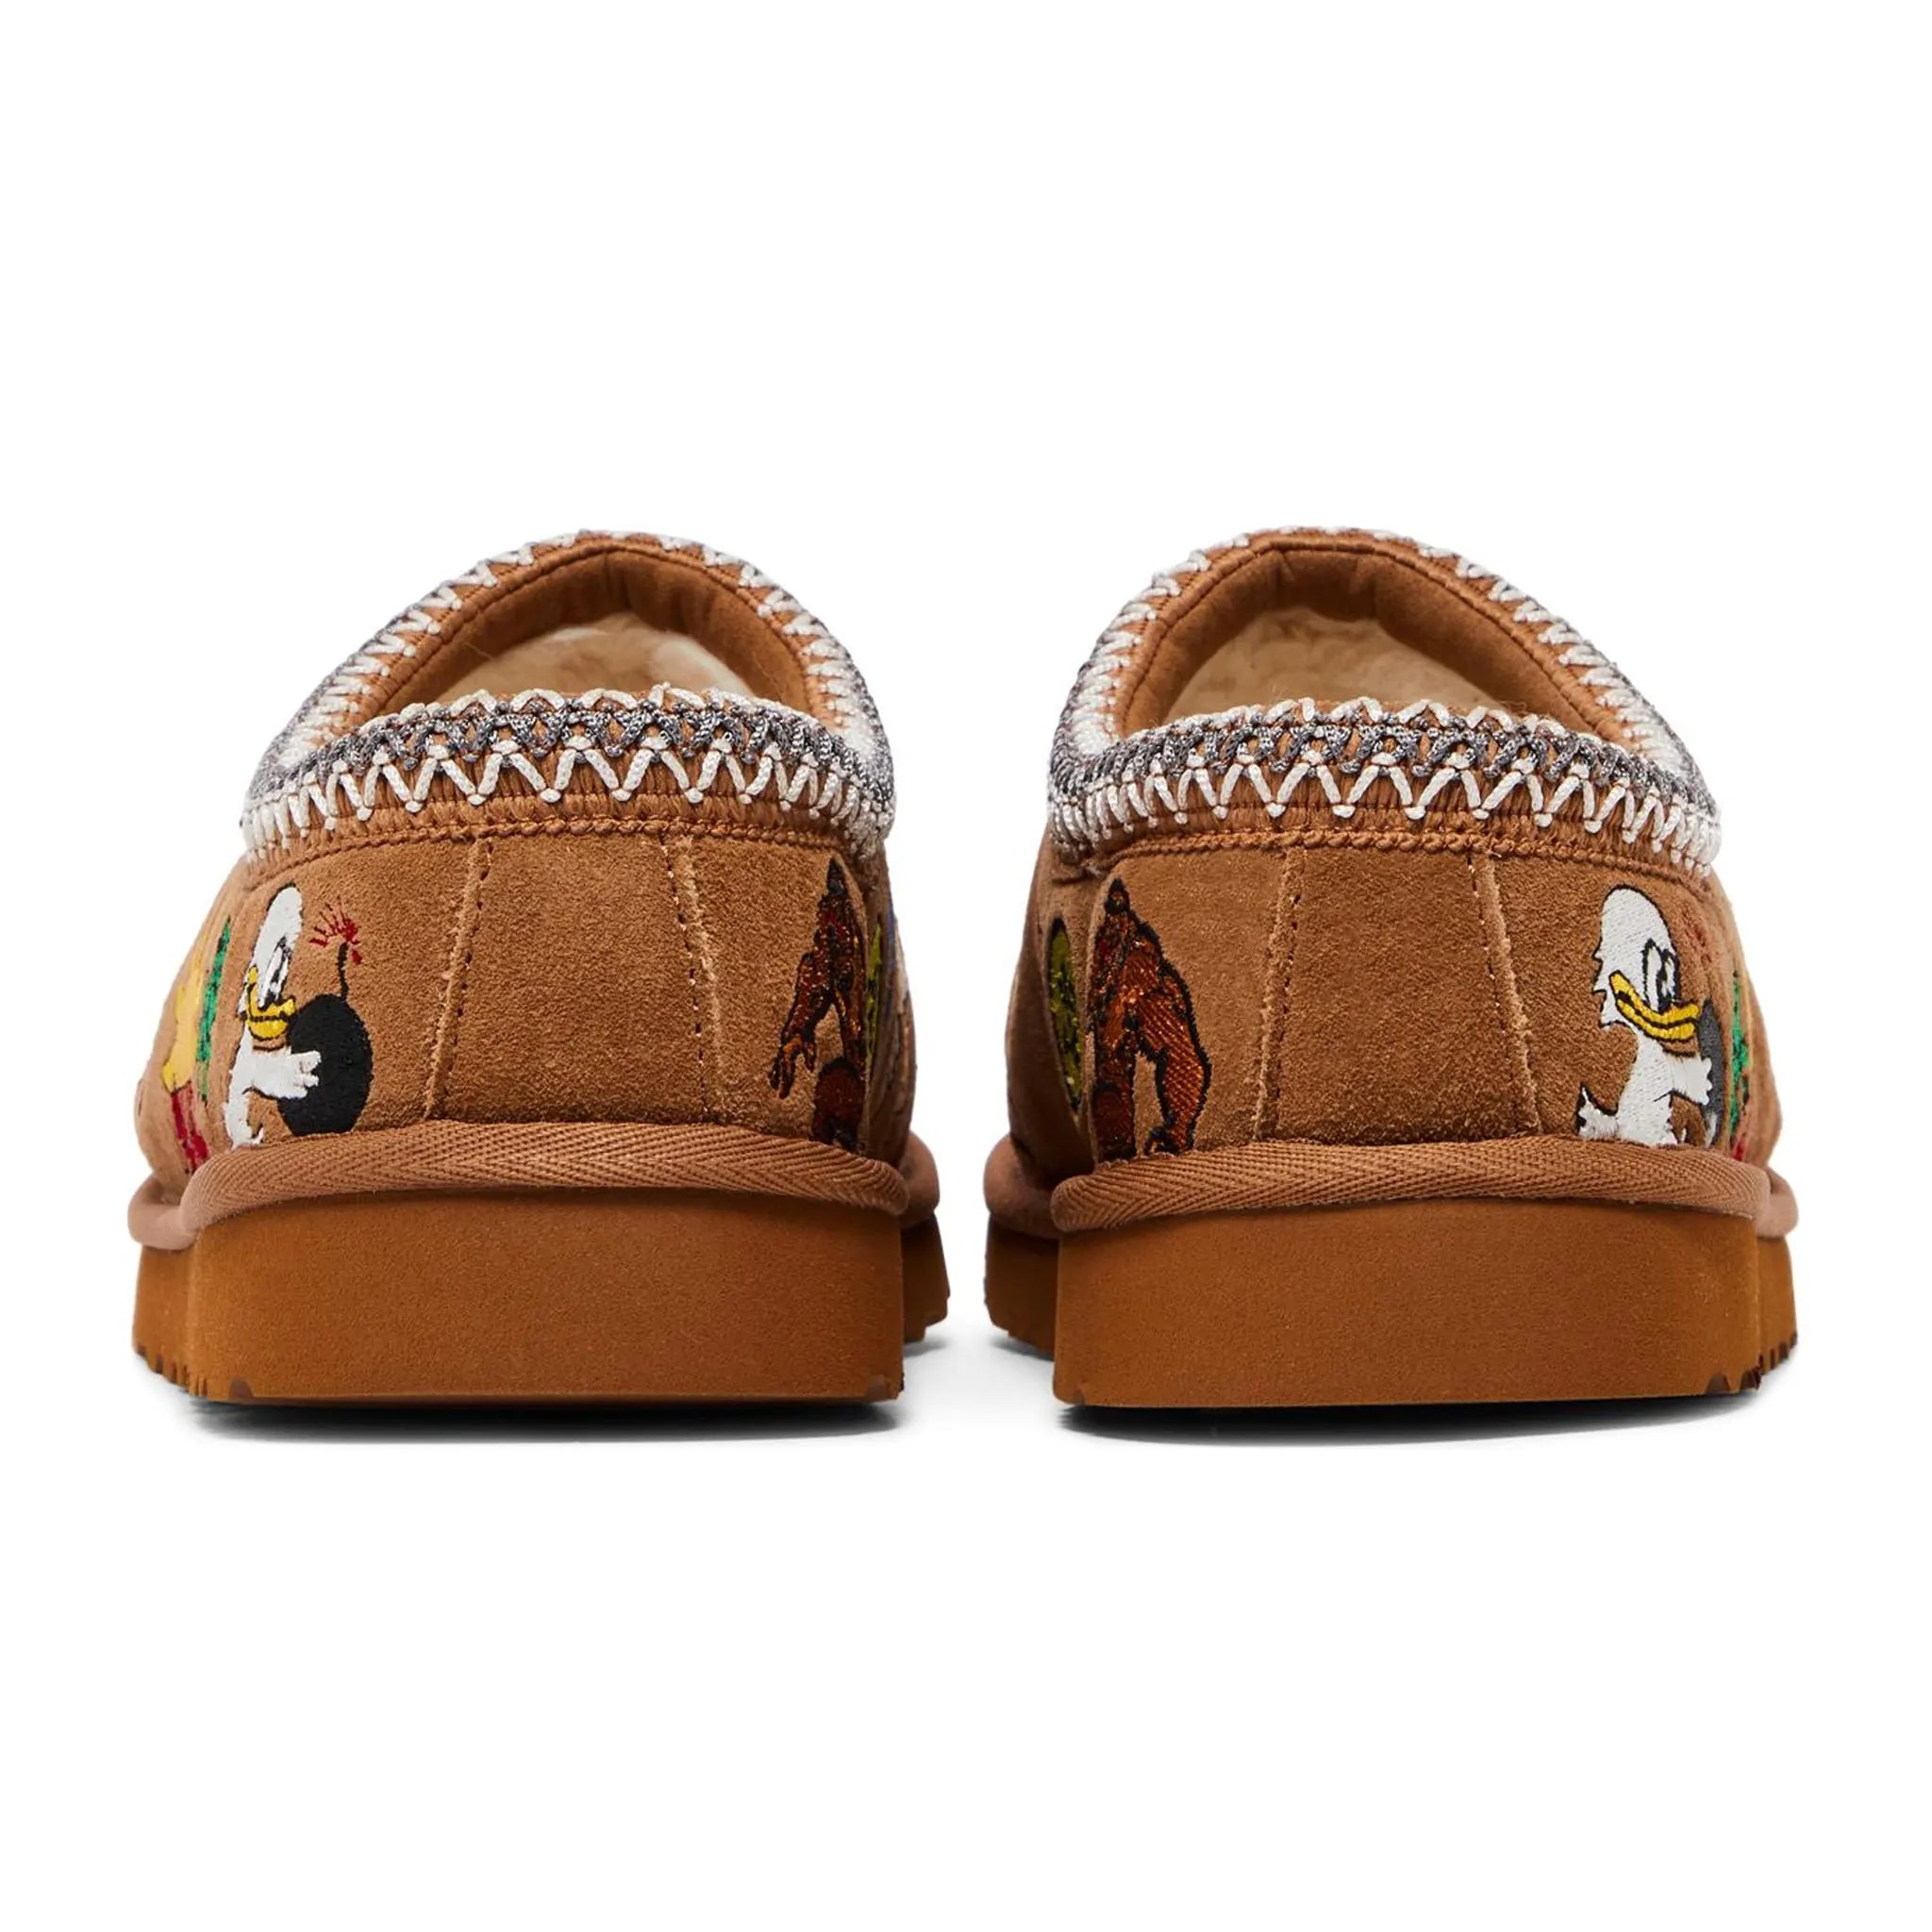 Back view of Palace x UGG Tasman Chestnut Slippers 1157290-CHE